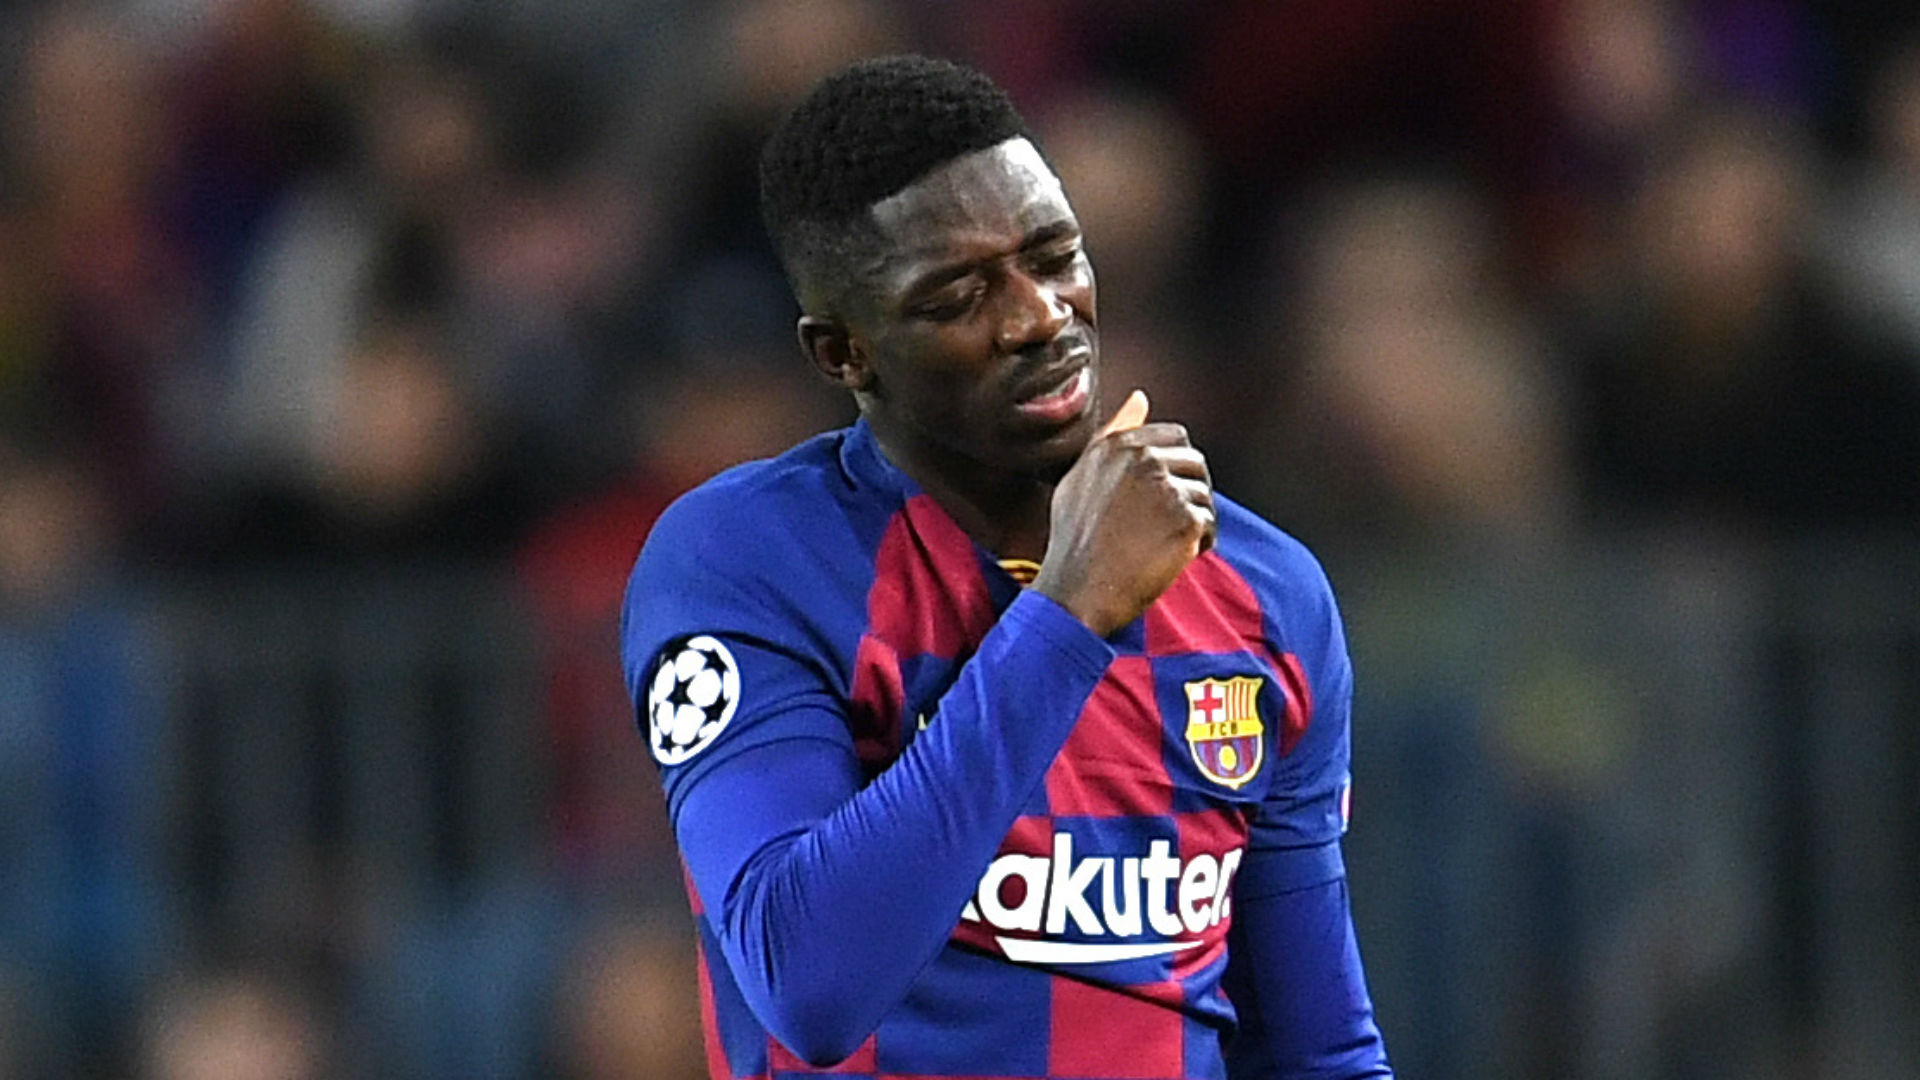 Ousmane Dembele could finally return from injury against Bayern Munich, giving Barcelona coach Quique Setien a boost.